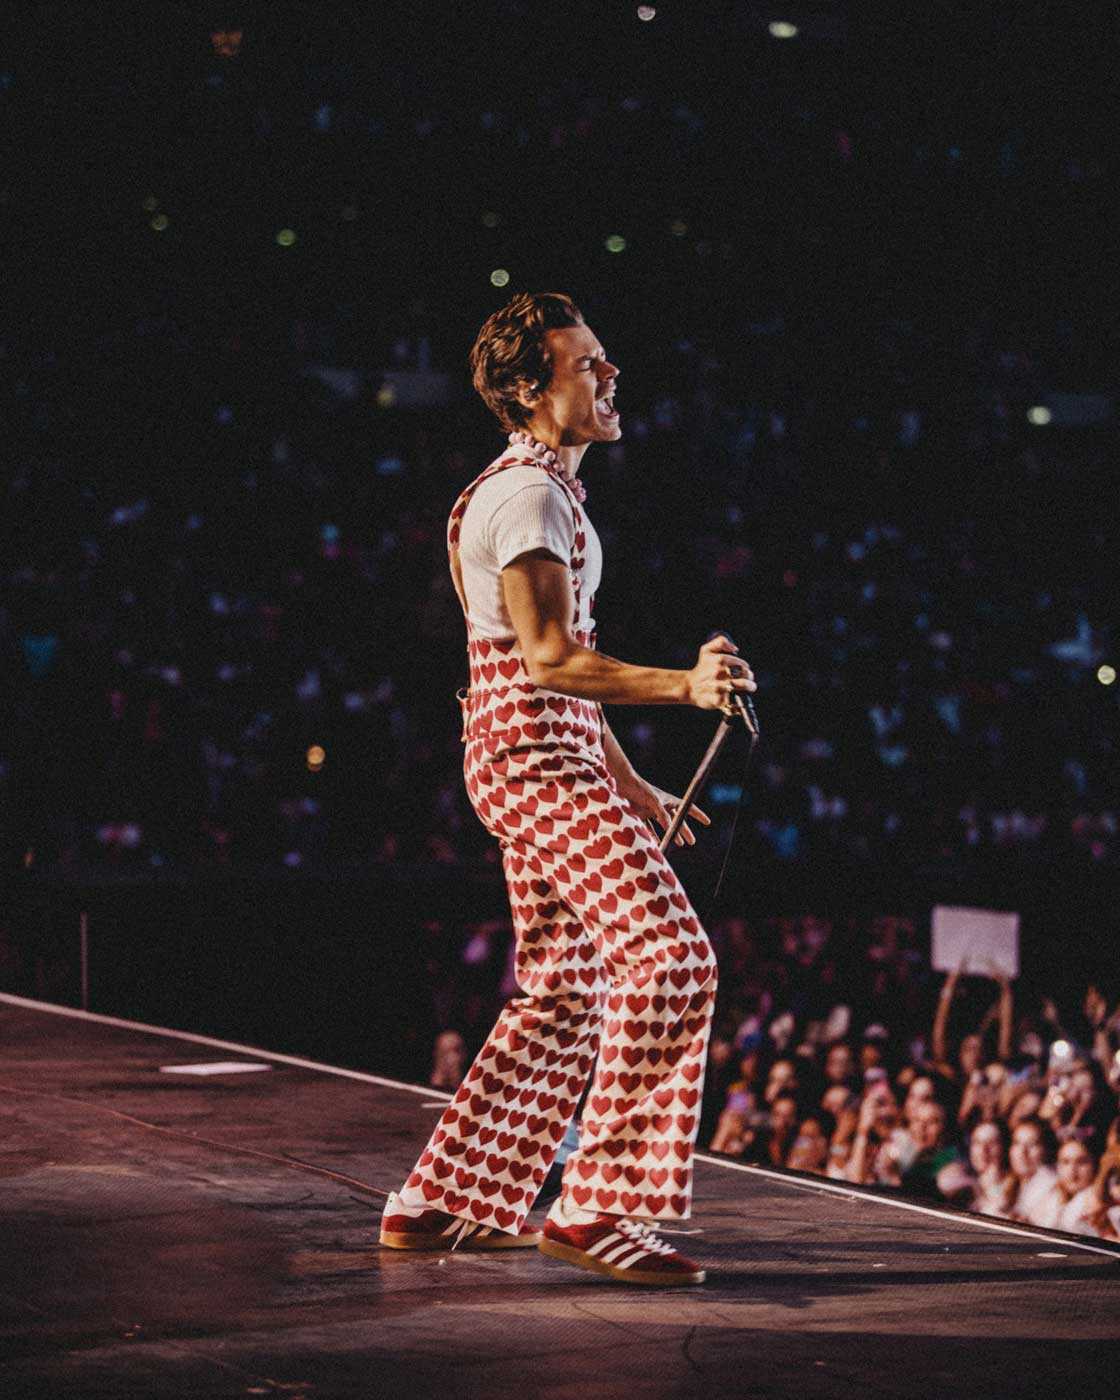 Harry Styles' Custom Gucci Outfits for Love on Tour 2022, an Ode